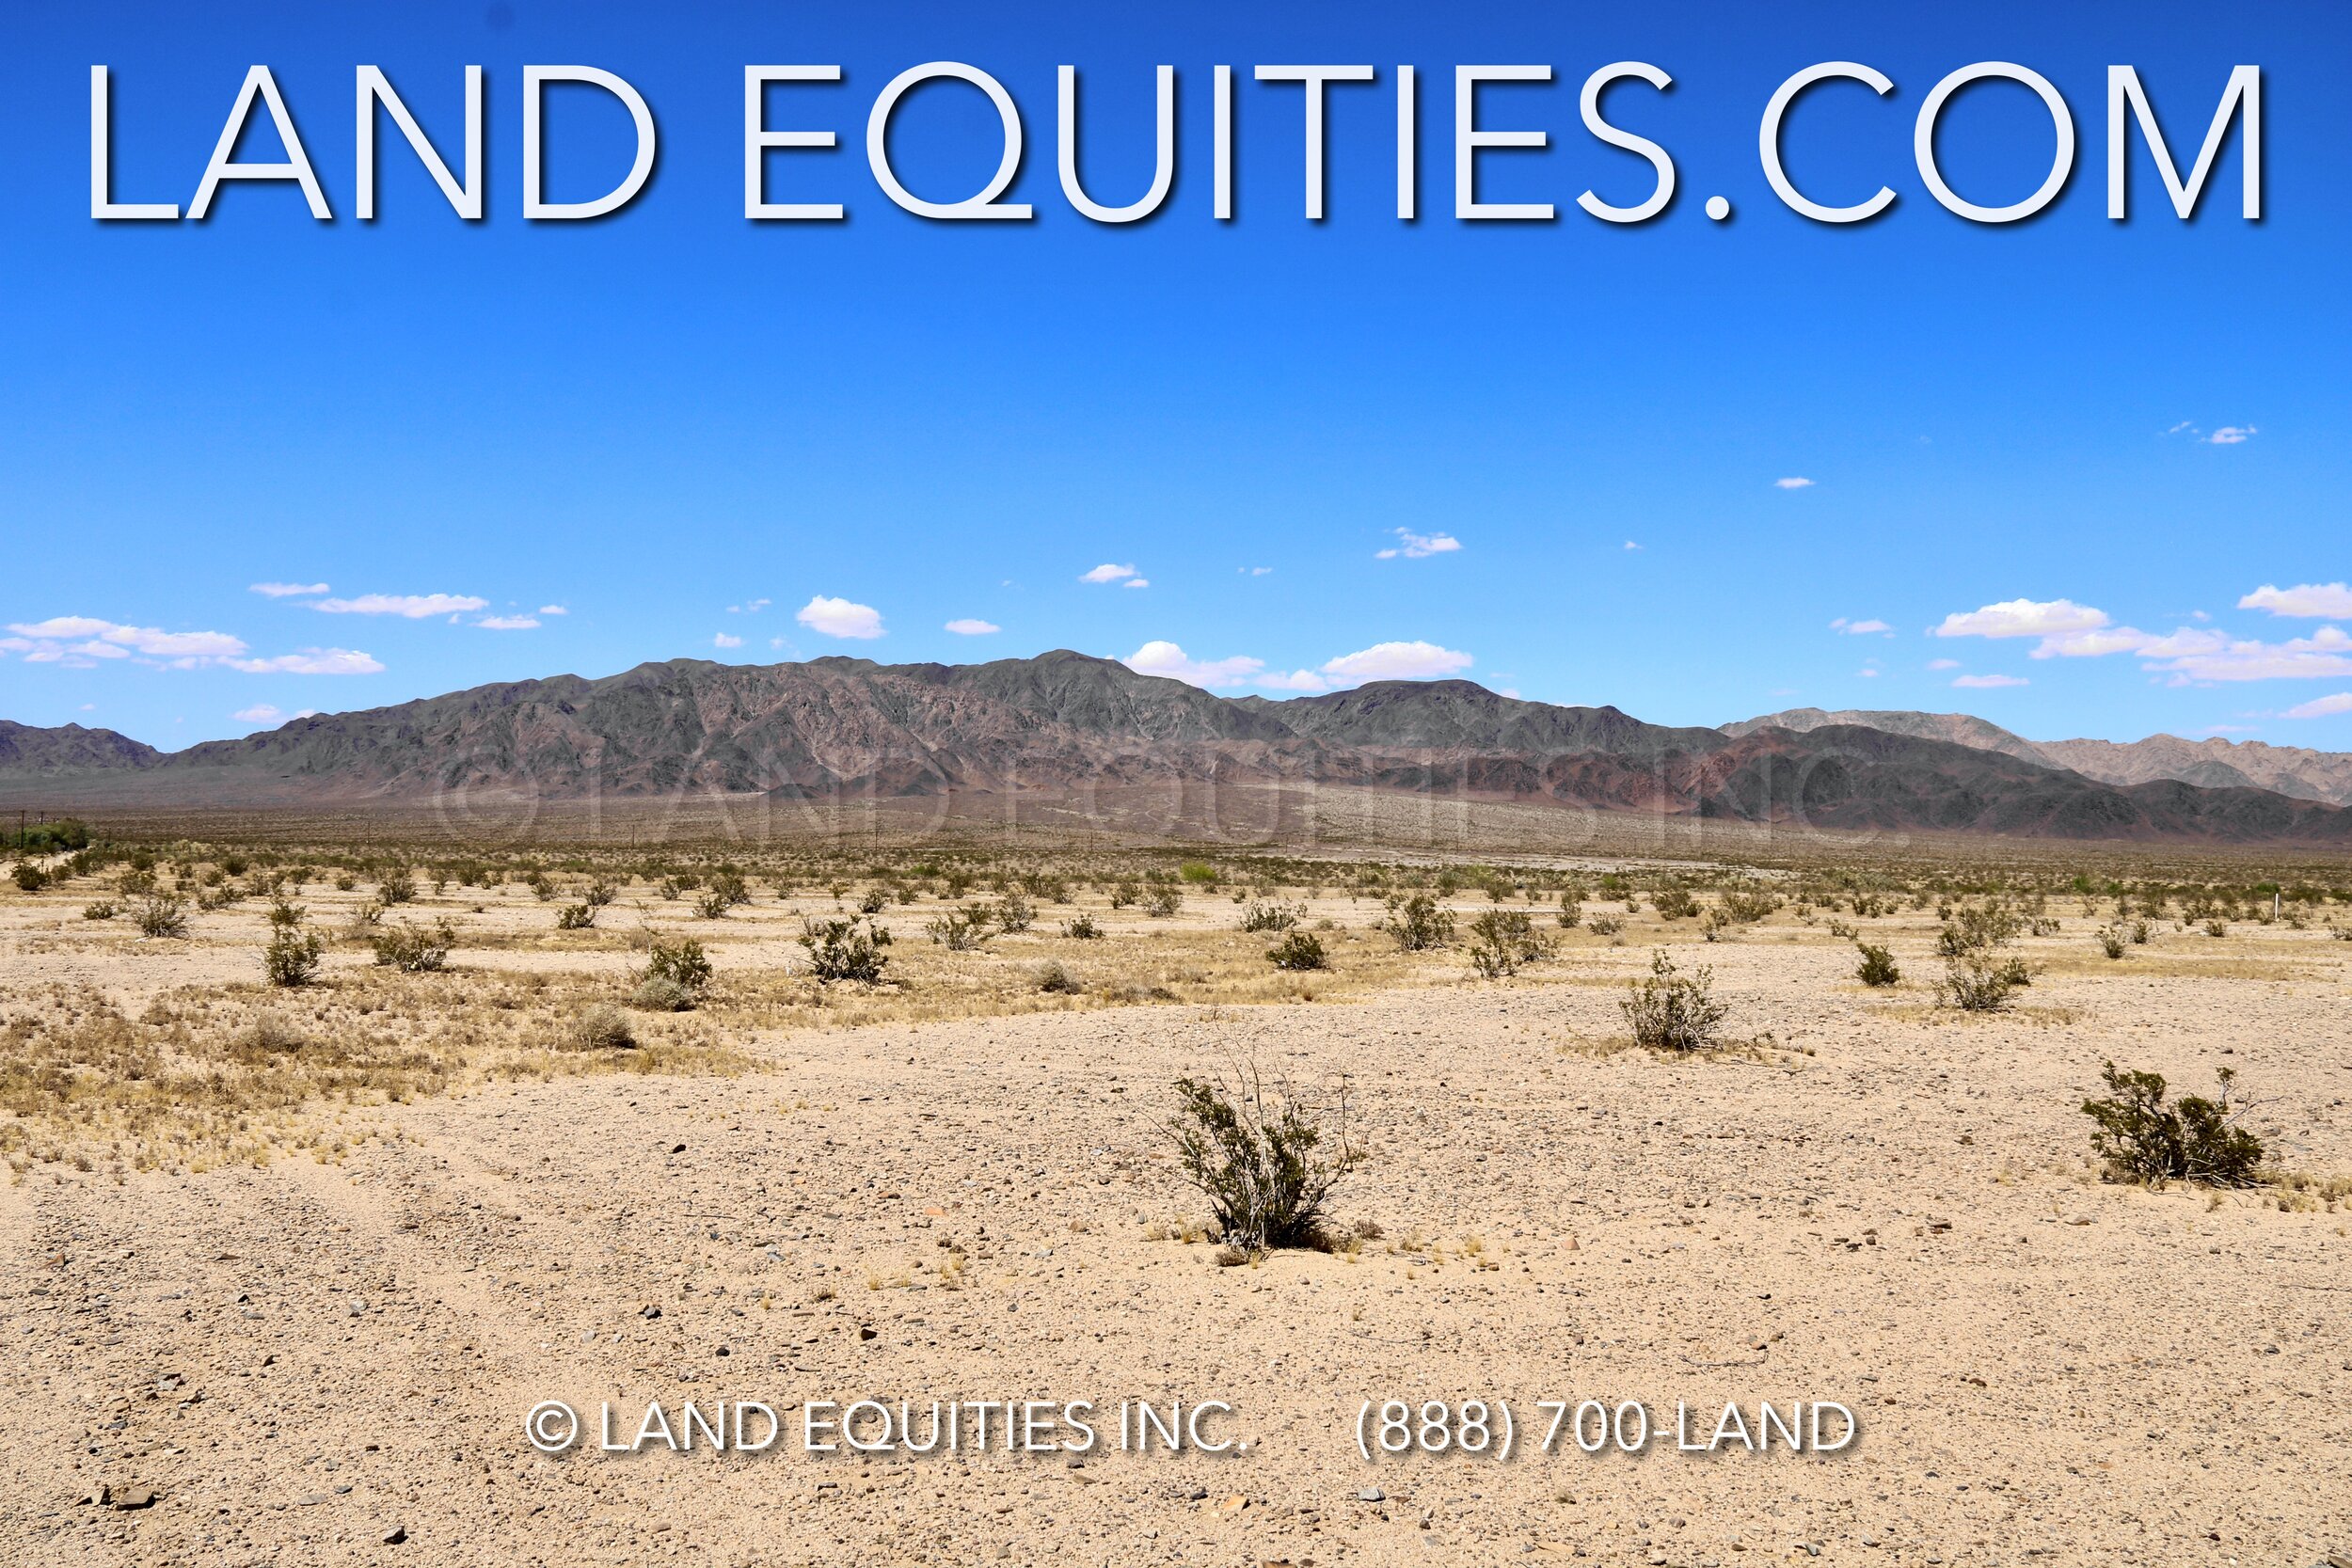 LAND EQUITIES — 2 ACRES AT THE BASE OF THE CLEGHORN LAKES WILDERNESS